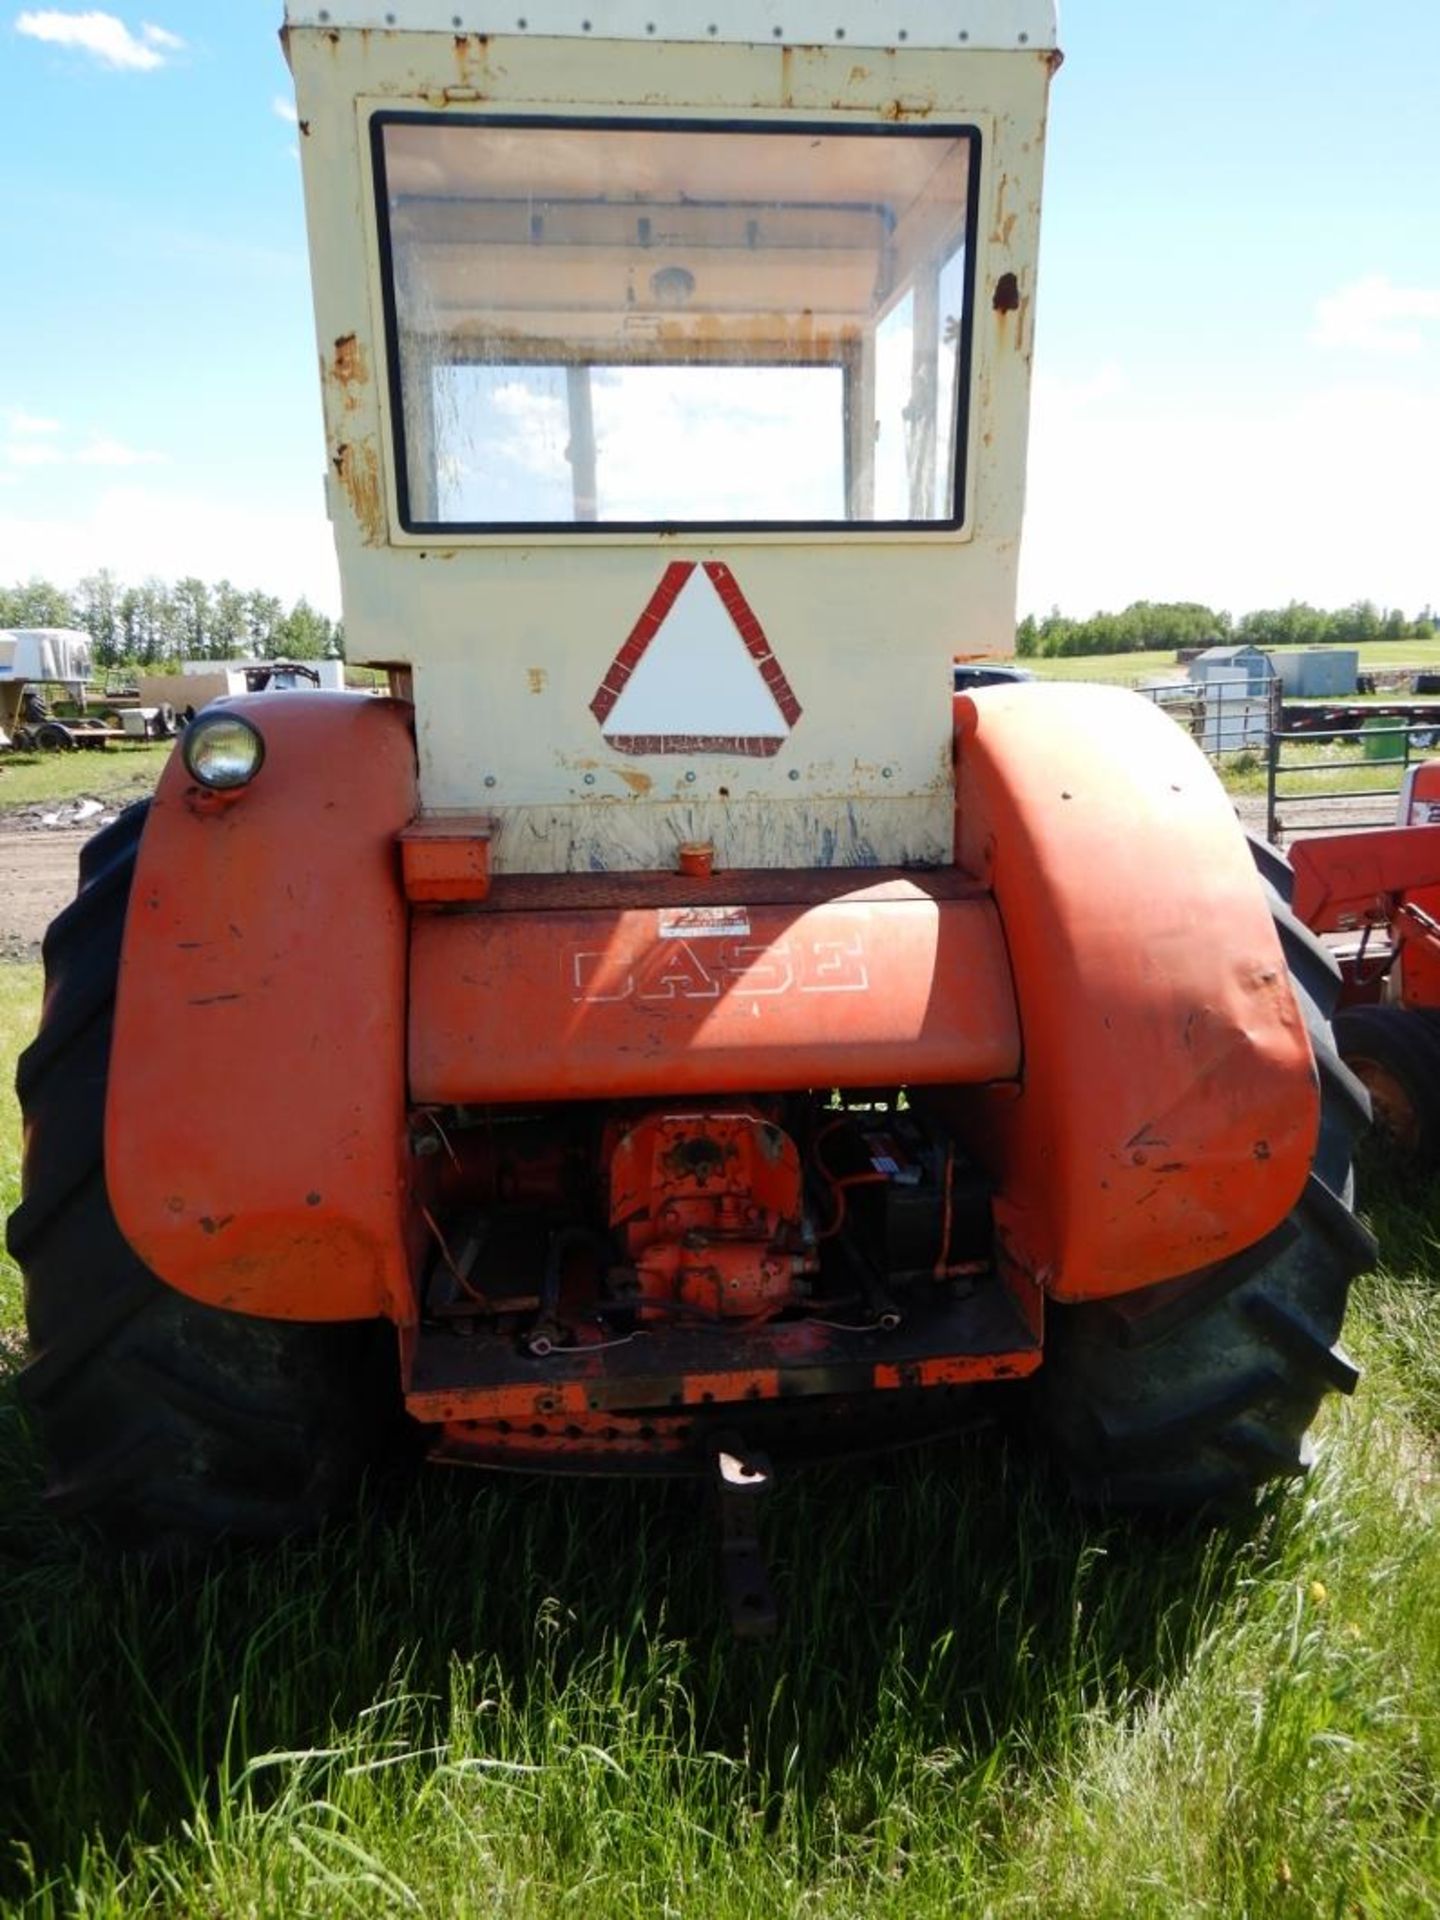 CASE 930 COMFORT KING TRACTOR W/ CAB, DIESEL ENGINE, 18.4X30 RUBBER, 5140 HR SHOWING, S/N 8250981 - Image 6 of 12